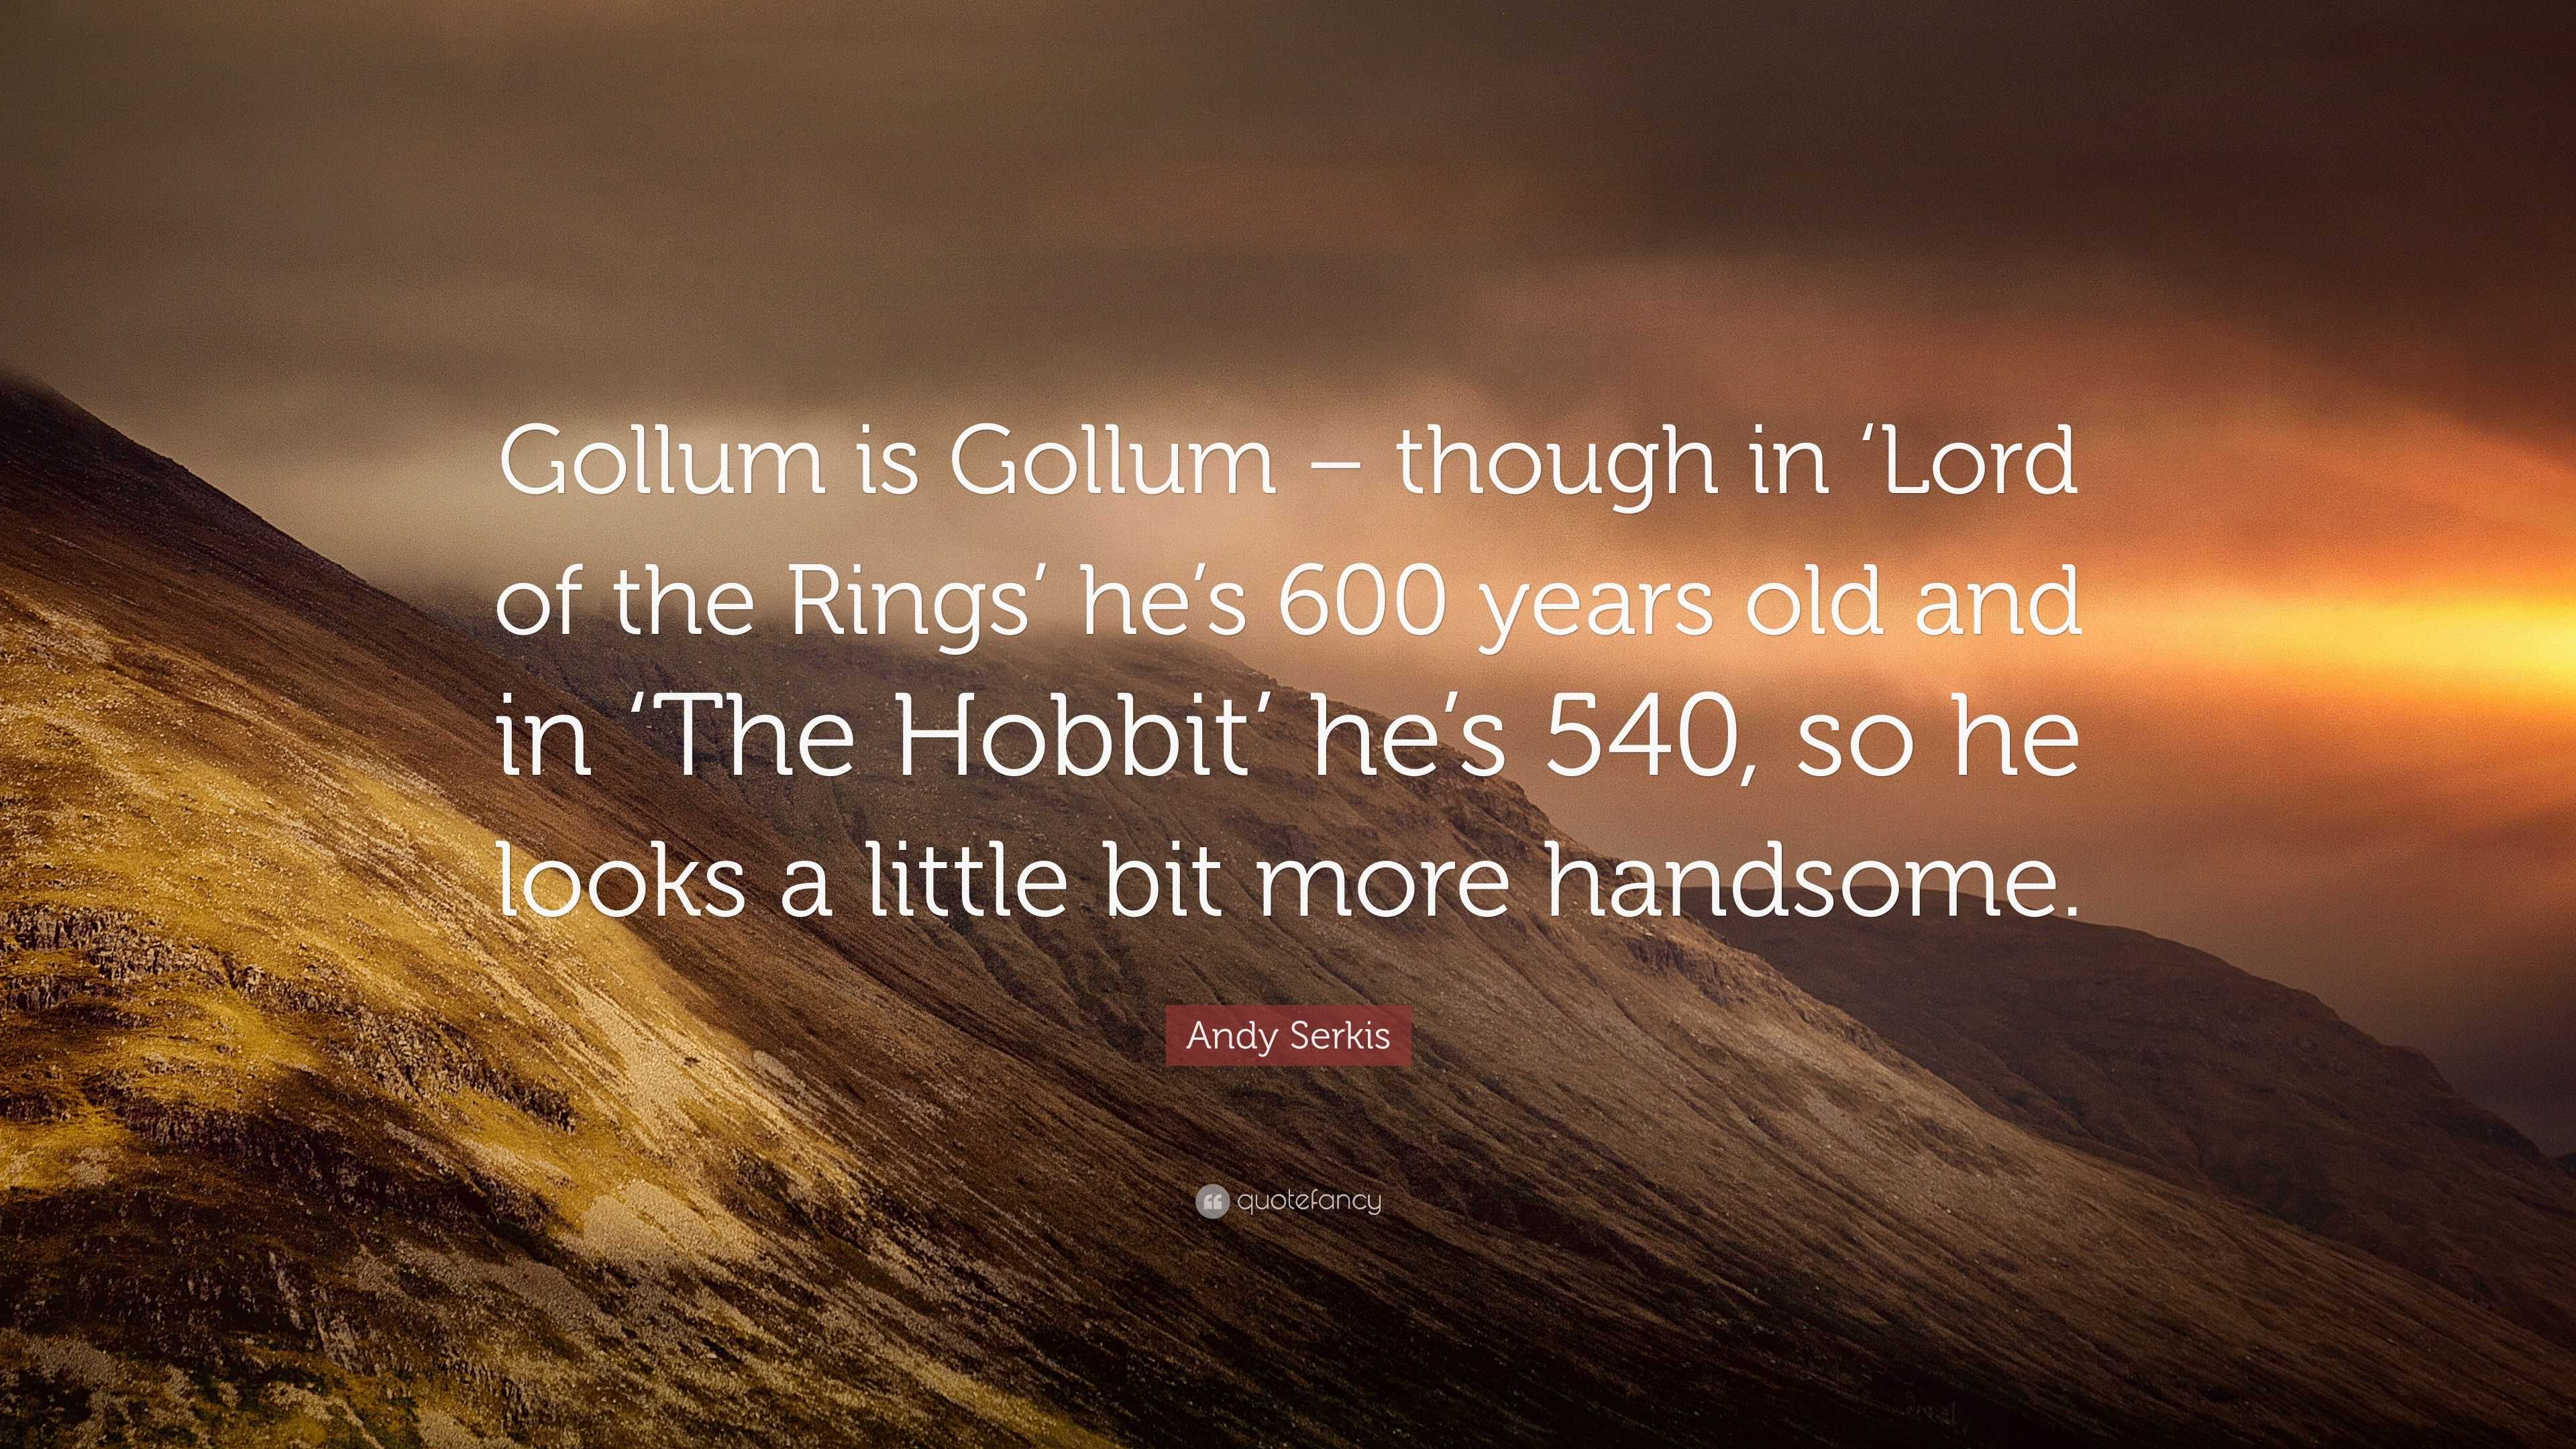 lord of the rings gollum quote galadriel